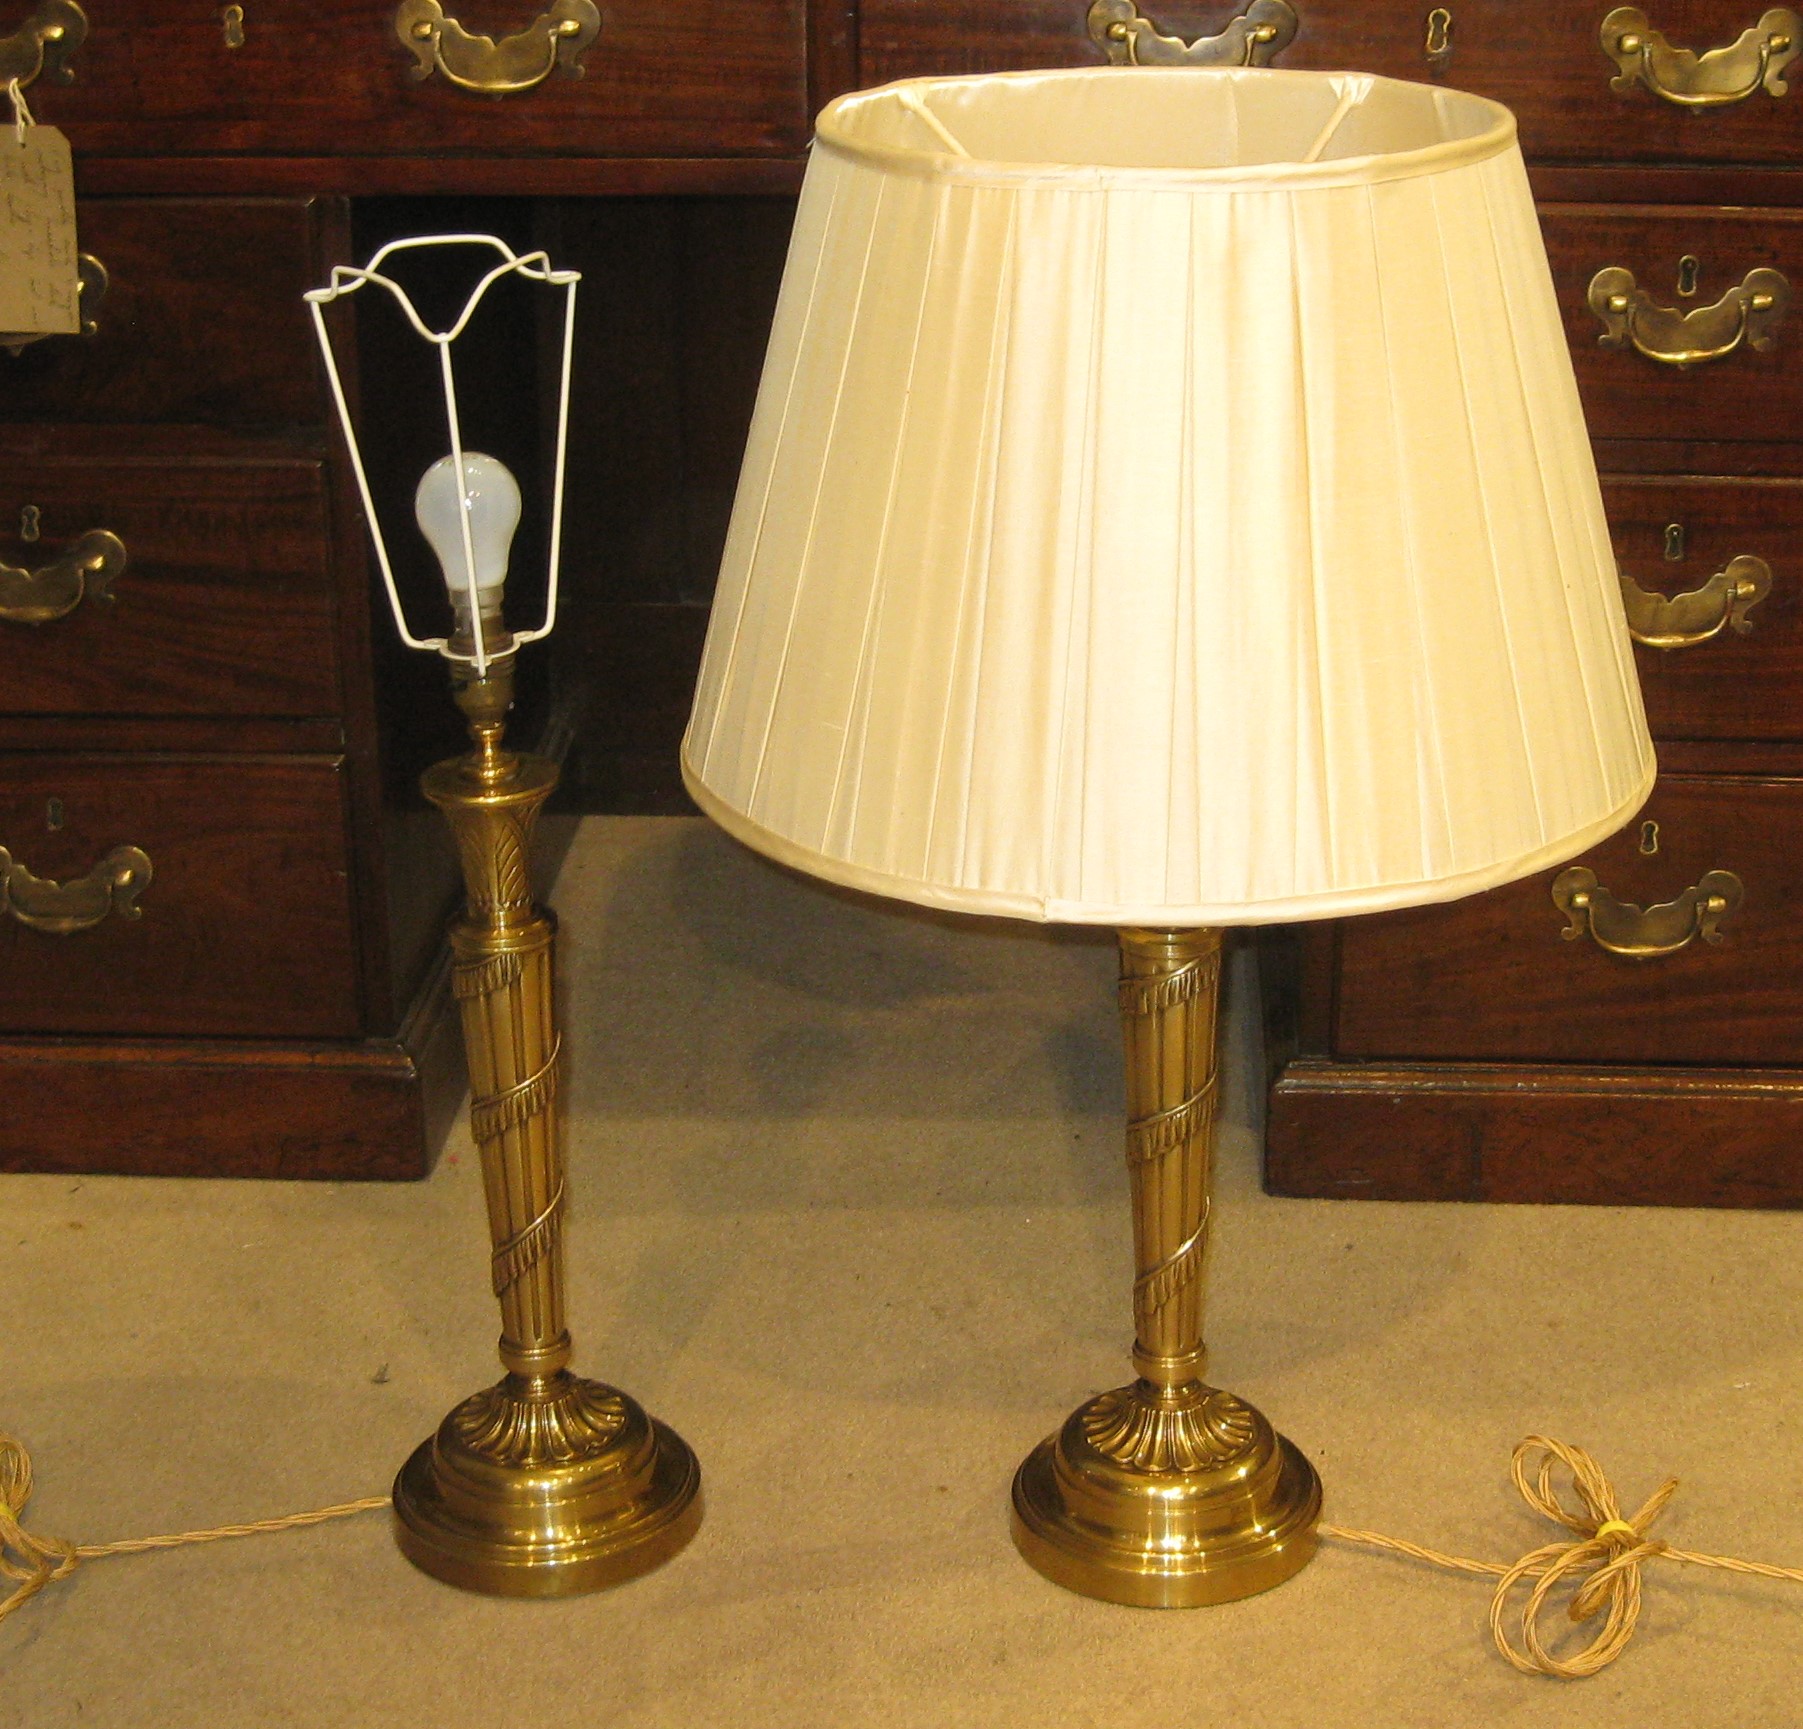 Fine quality pair of heavy solid brass table lamps.